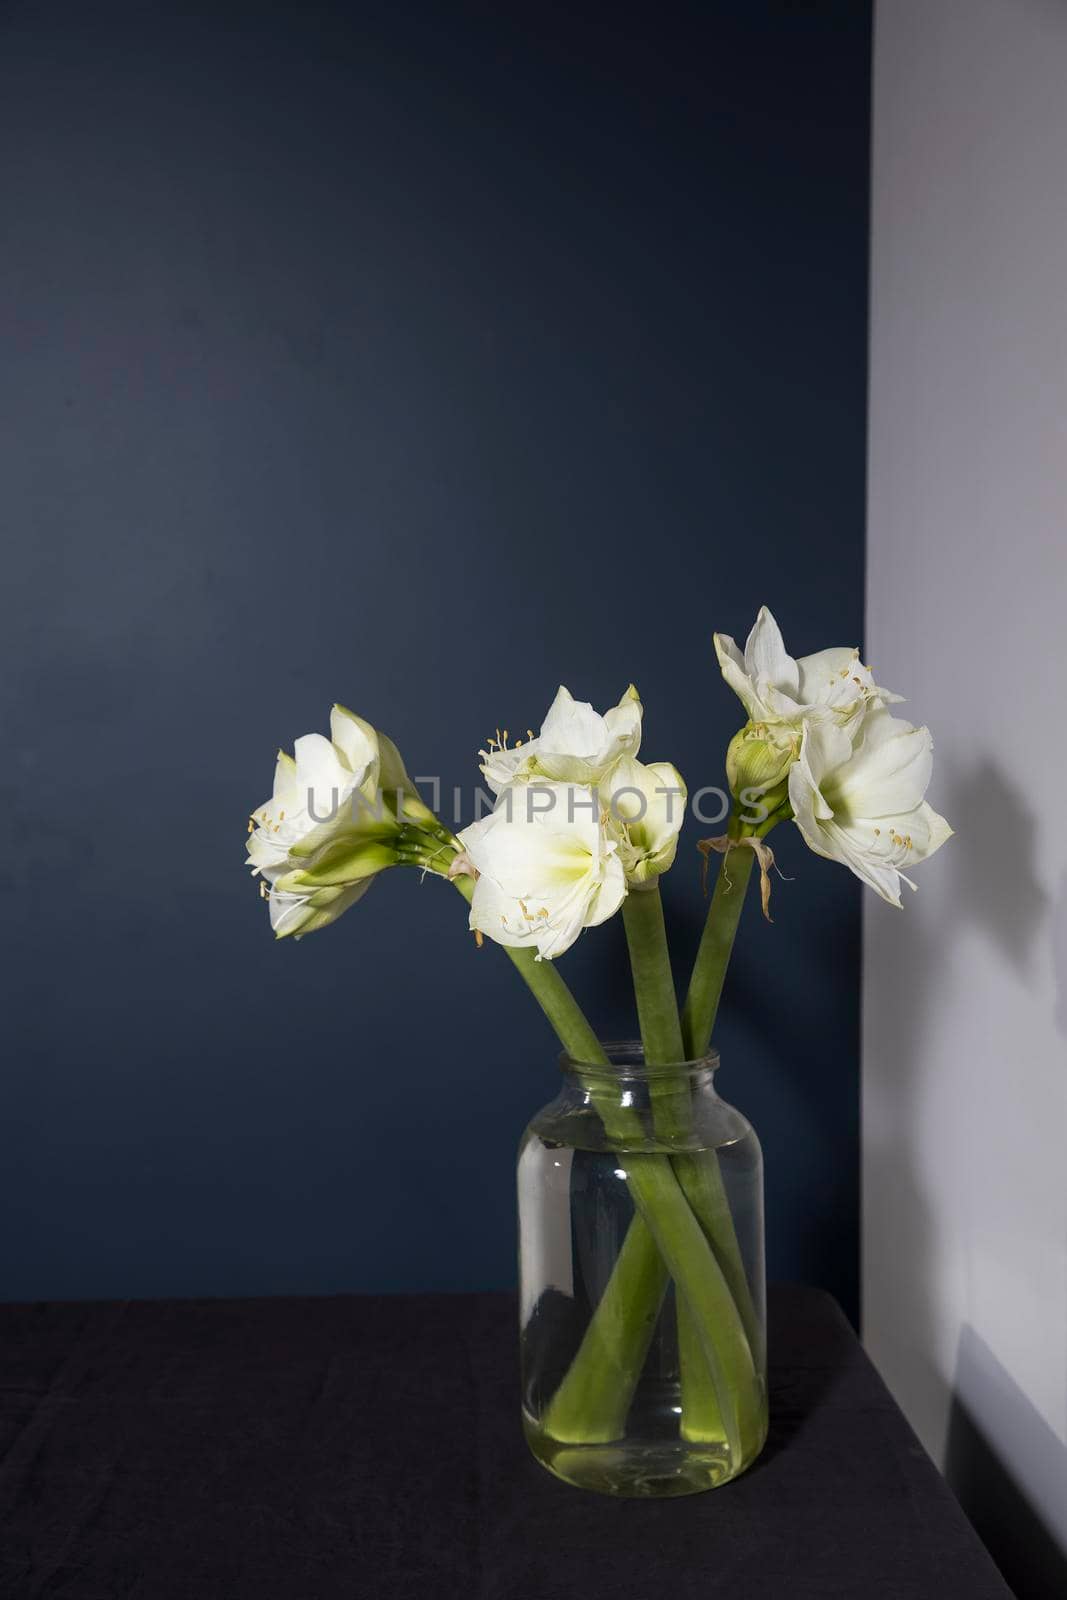 Bouquet of white lilies in a tall glass vase on a wooden table against a dark blue wall. Copy space. Fresh bud